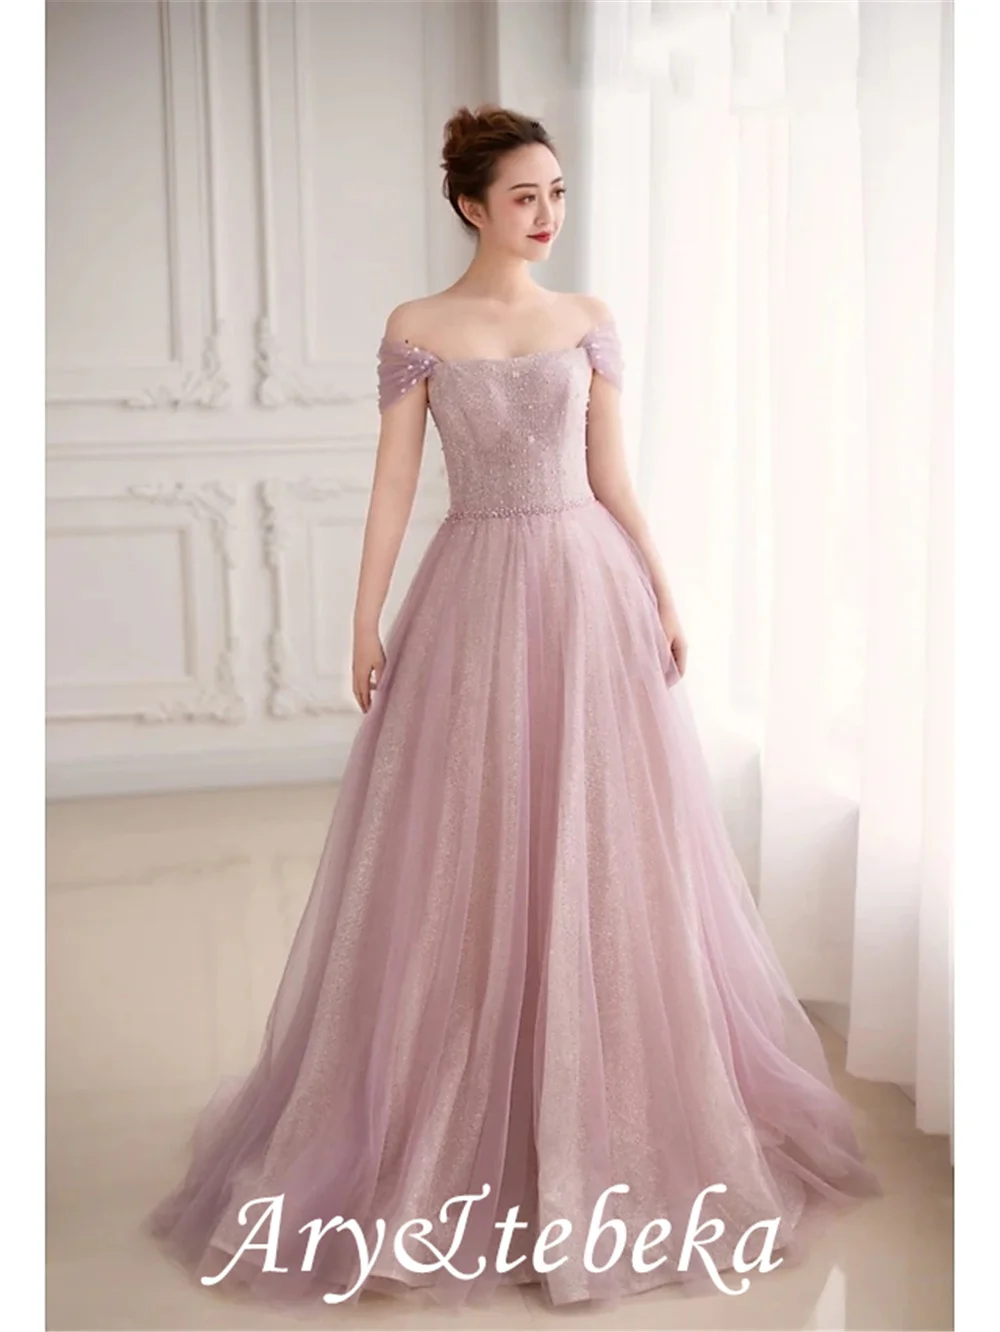 

A-Line Glittering Elegant Prom Formal Evening Dress Off Shoulder Short Sleeve Sweep / Brush Train Tulle with Pleats Sequin 2021